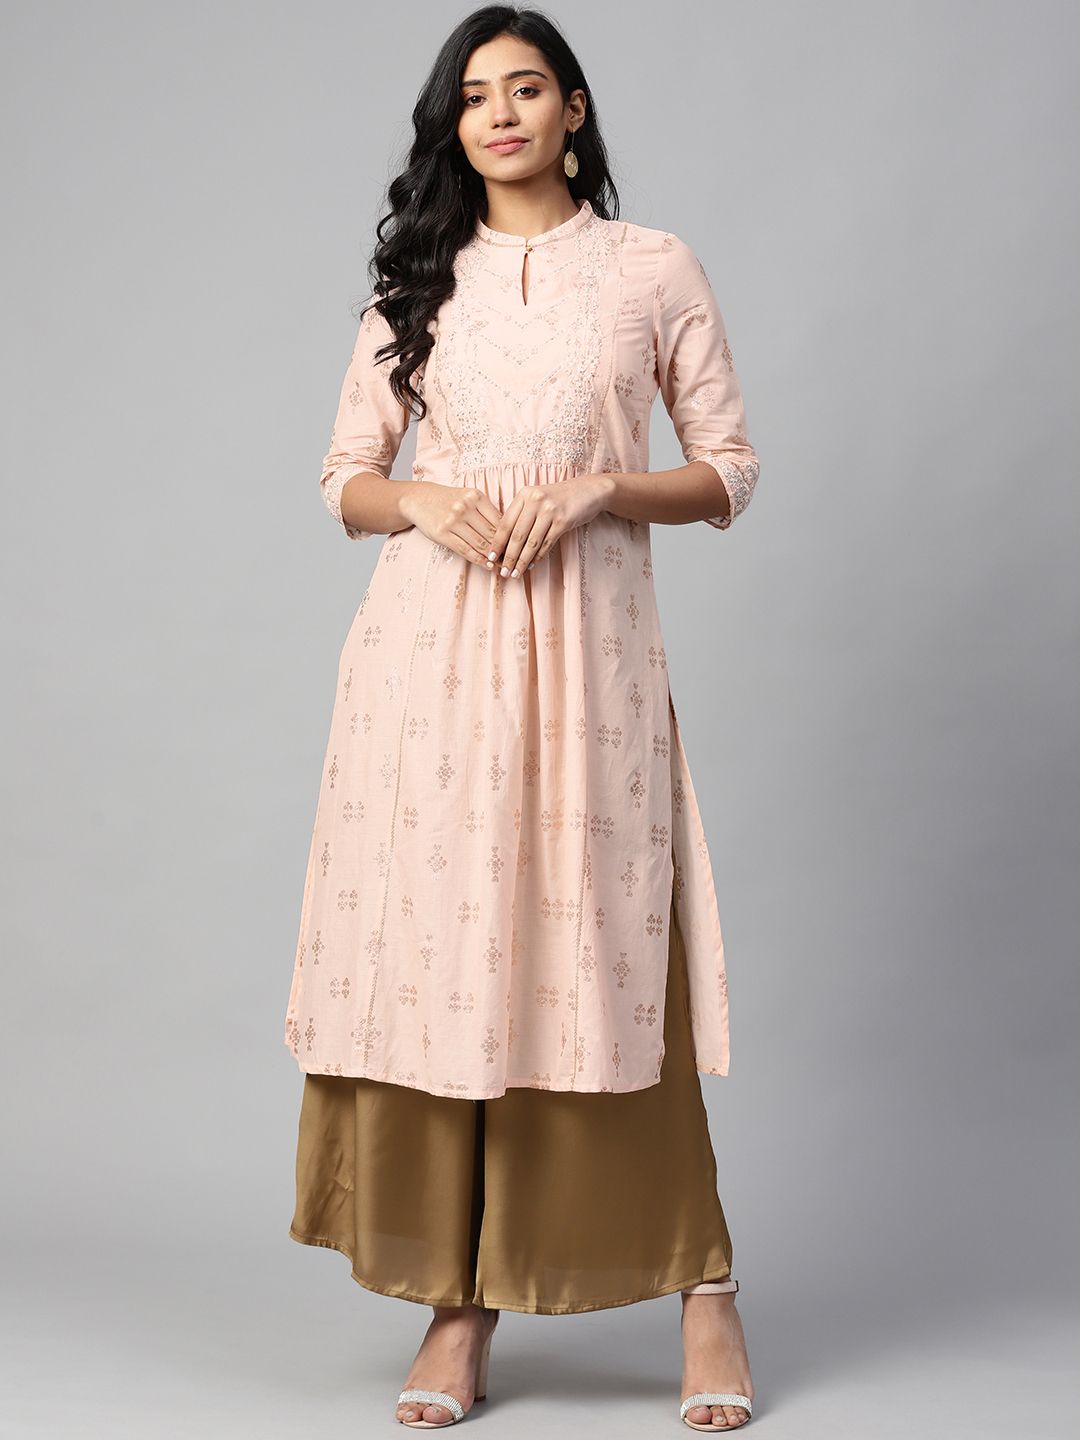 W Women Peach-Coloured Glitter Print Floral Embroidery A-Line Kurta with Sequin Detail Price in India